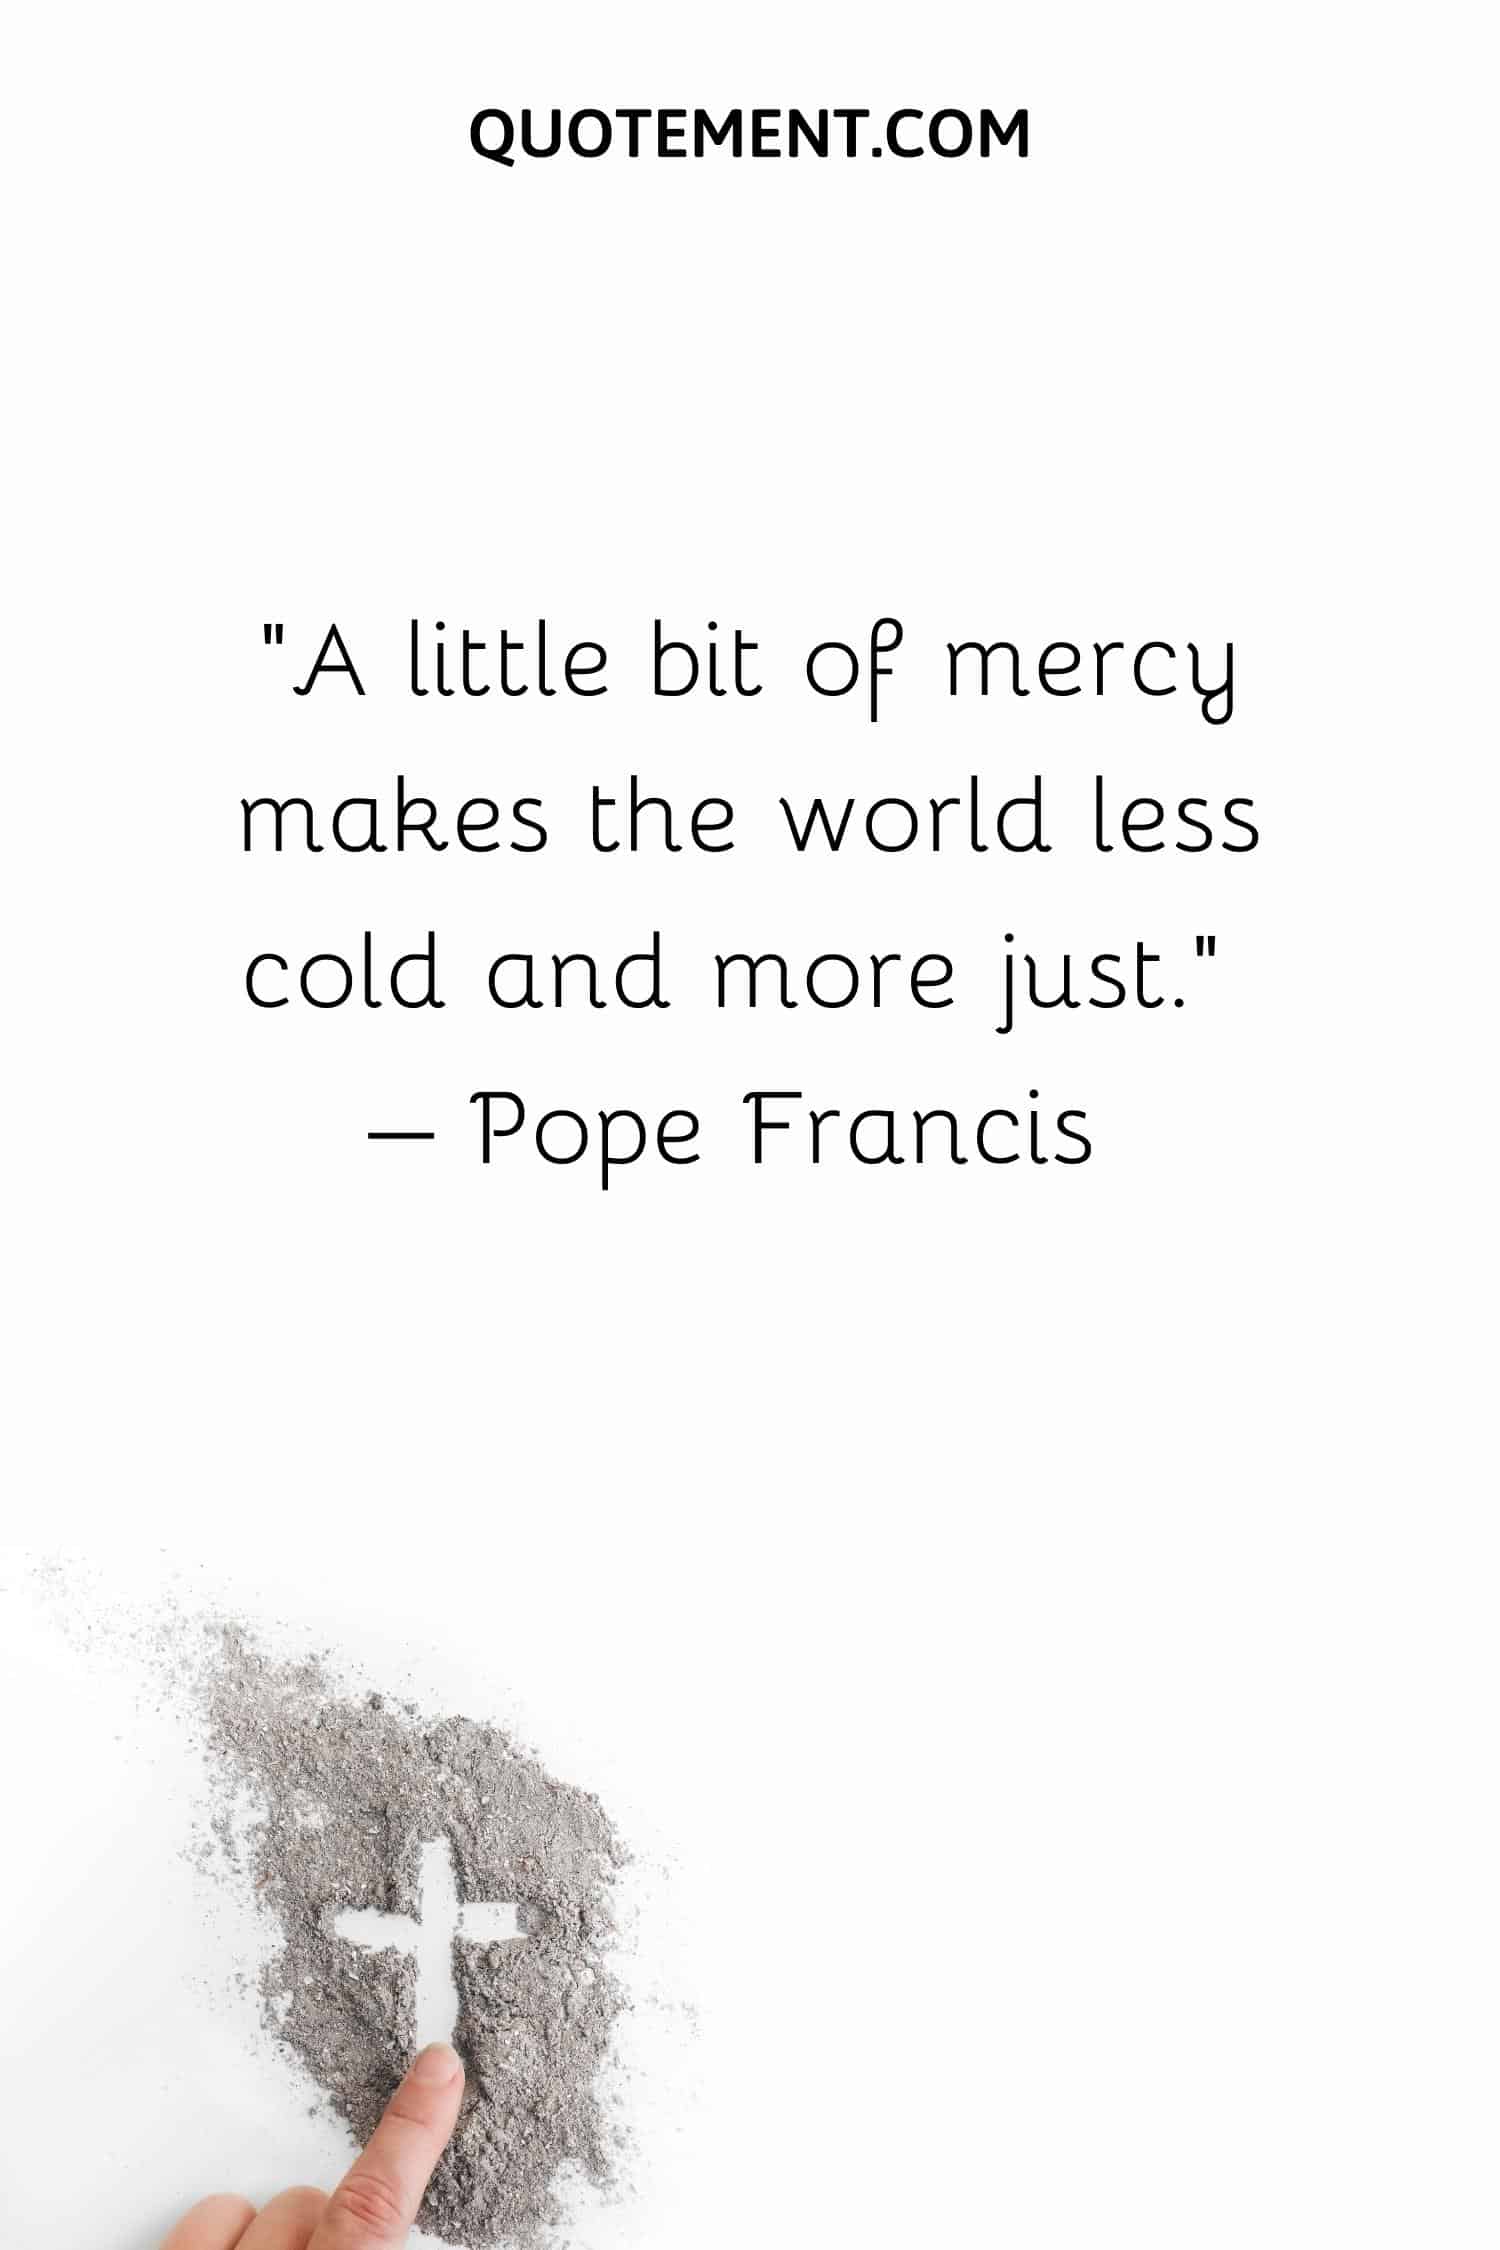 A little bit of mercy makes the world less cold and more just